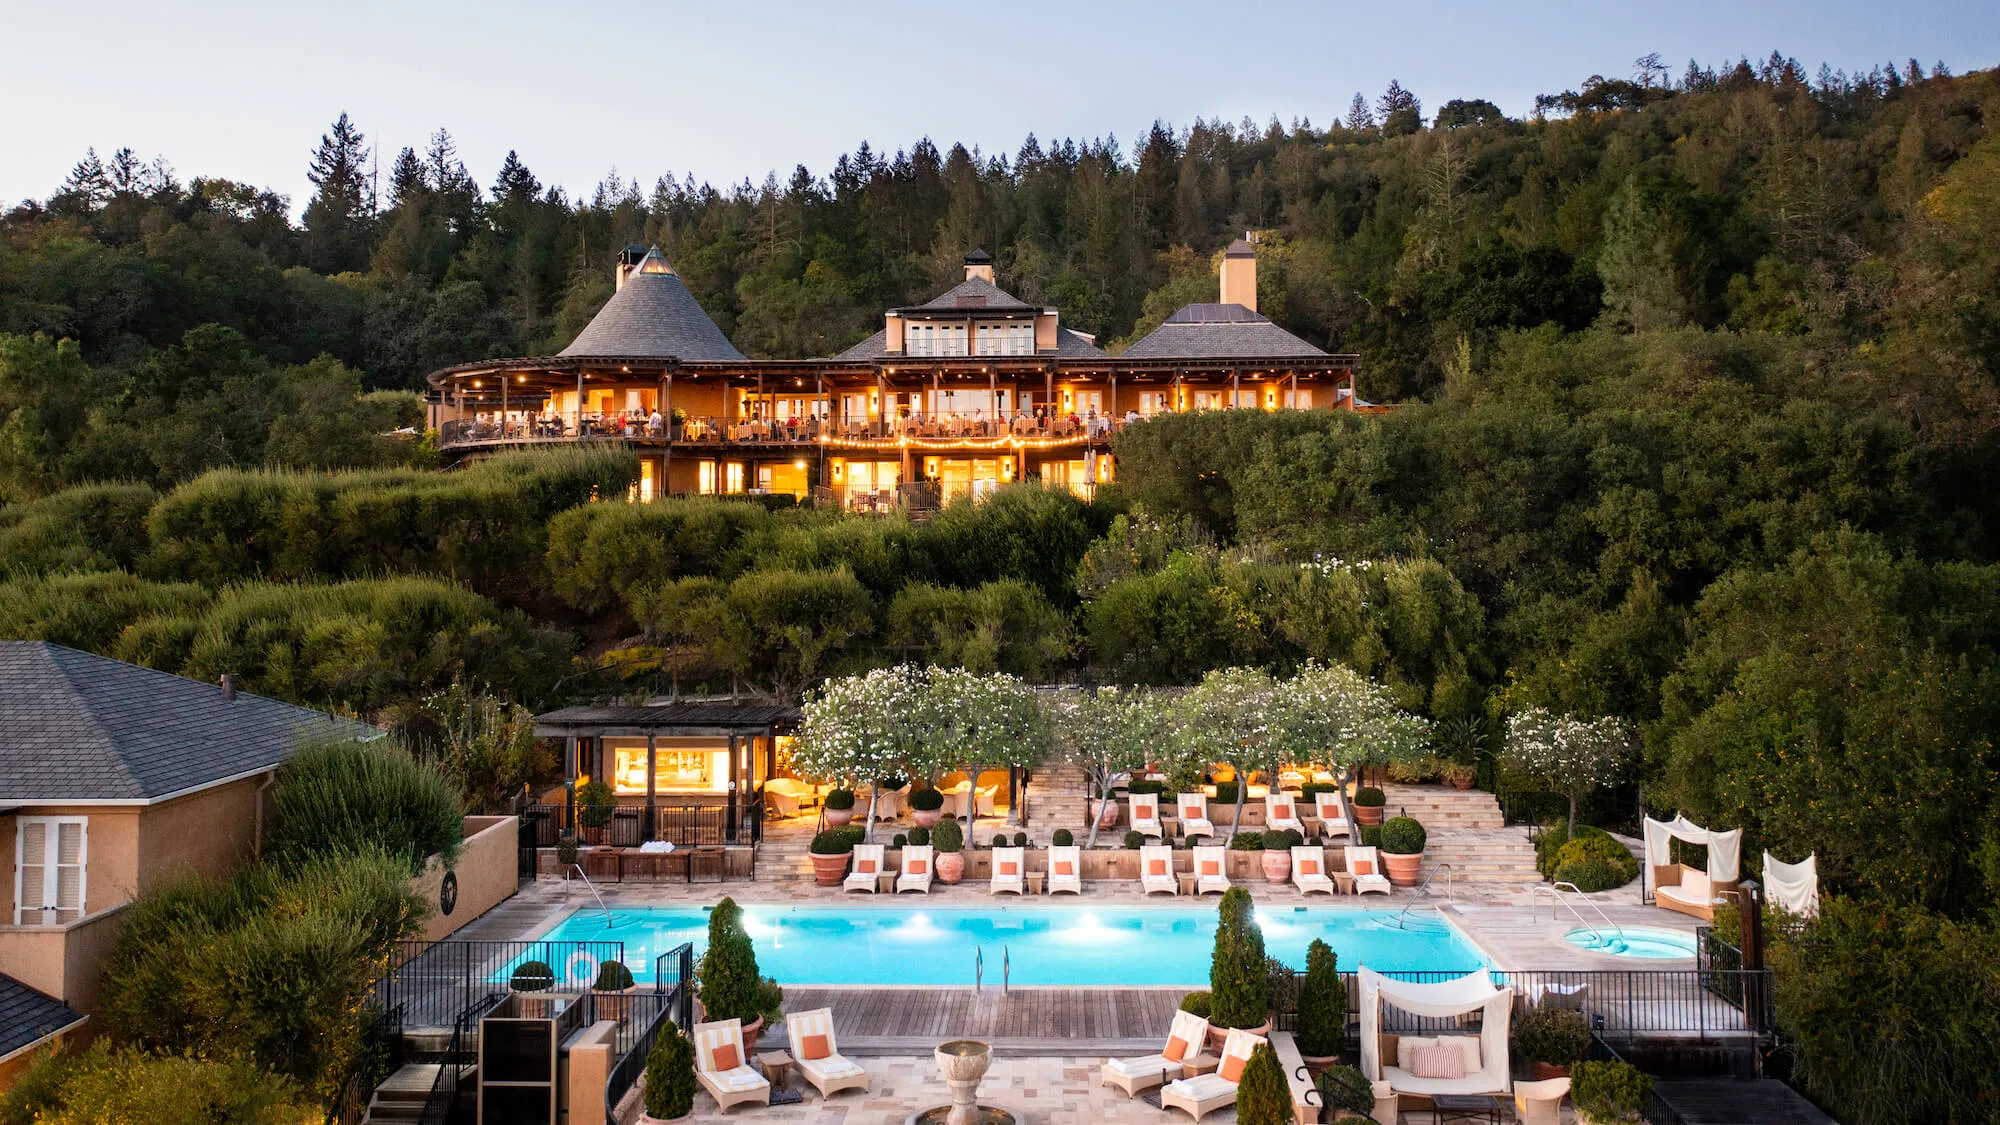 The Best Luxury Boutique Hotels in Napa